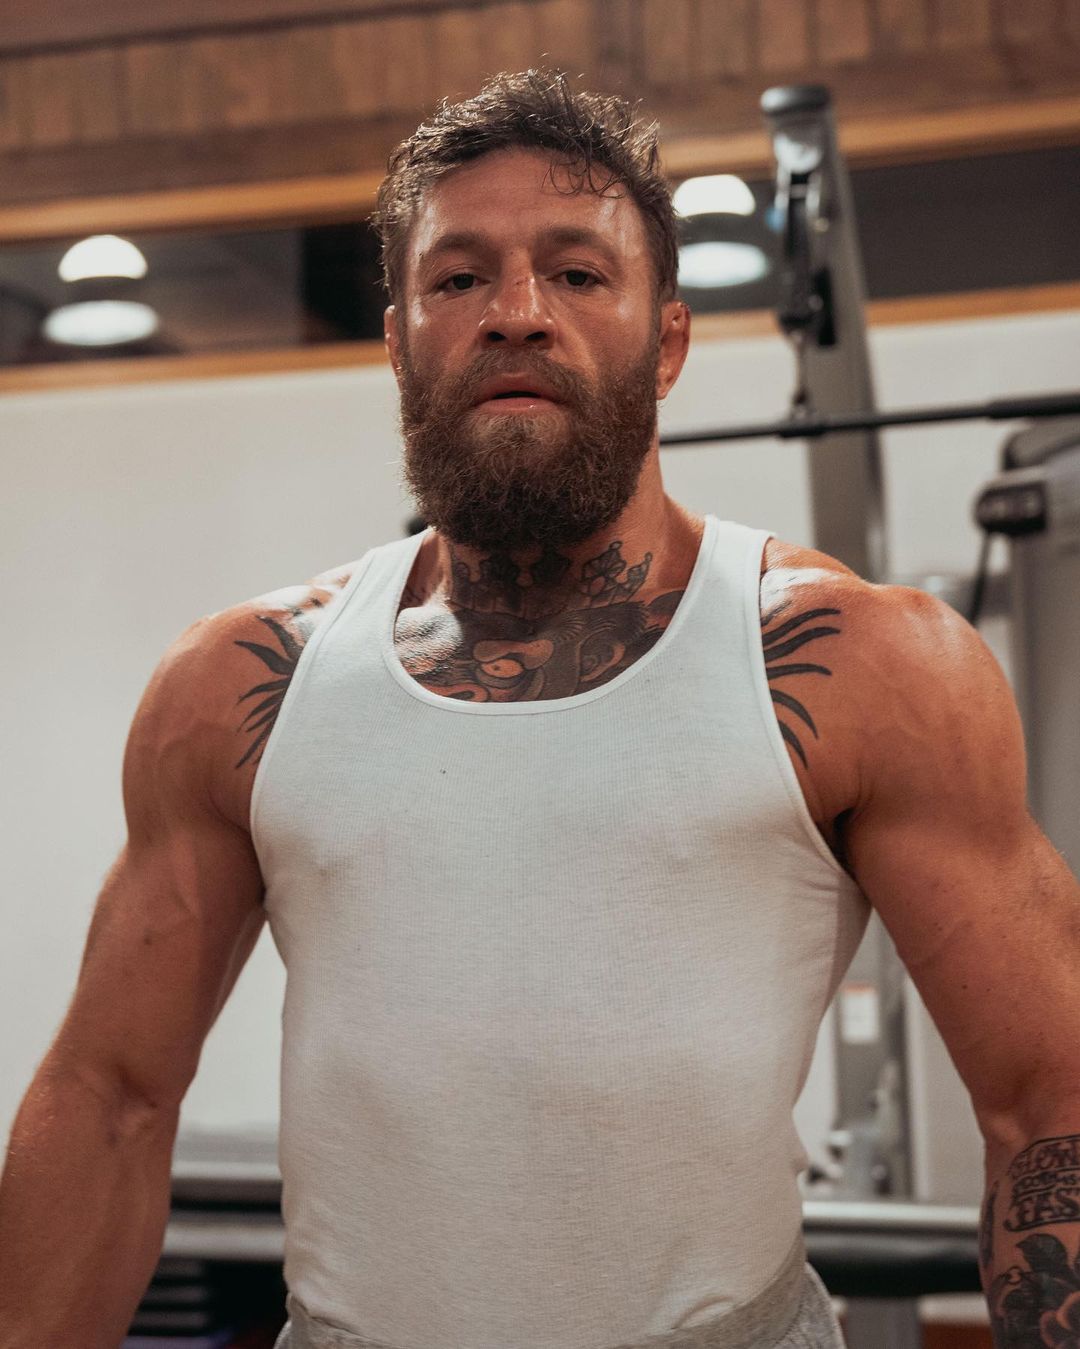 UFC Fighter Conor McGregor's Workout